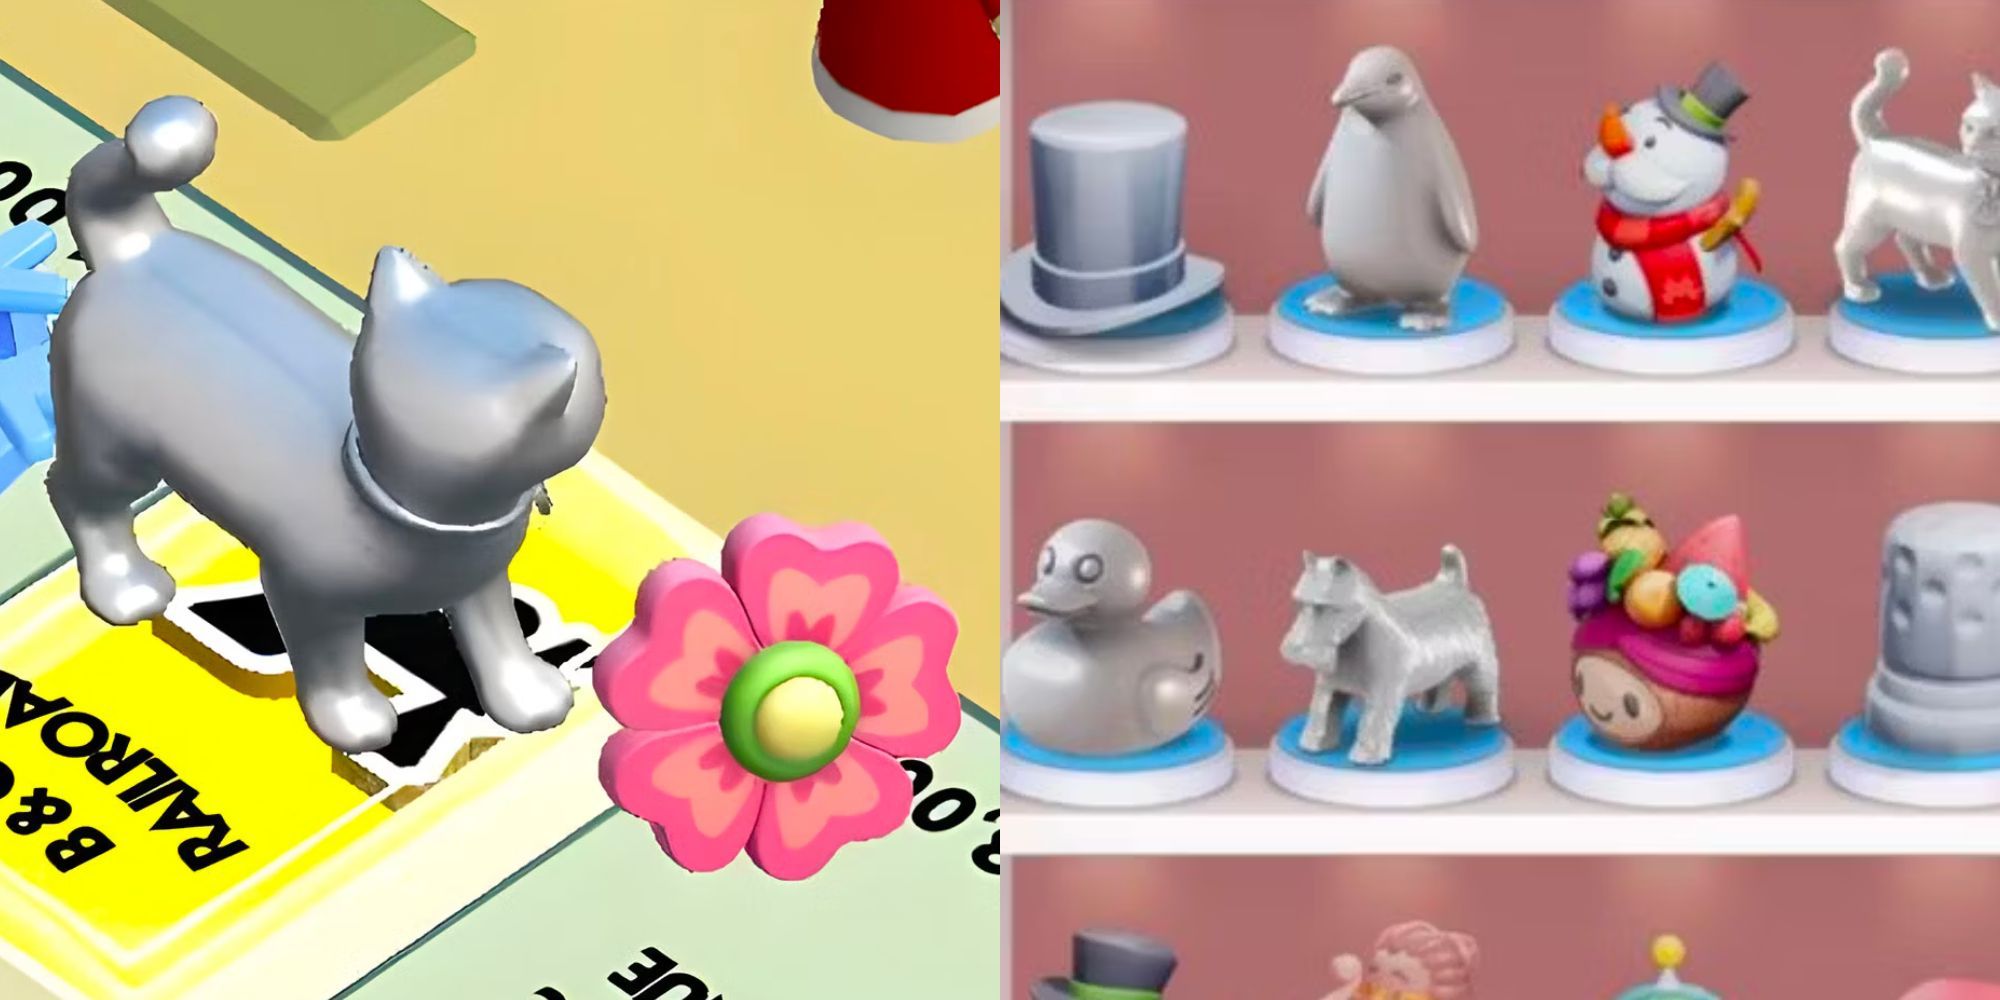 Dog token at the right, and a token library at the left picture in Monopoly Go.